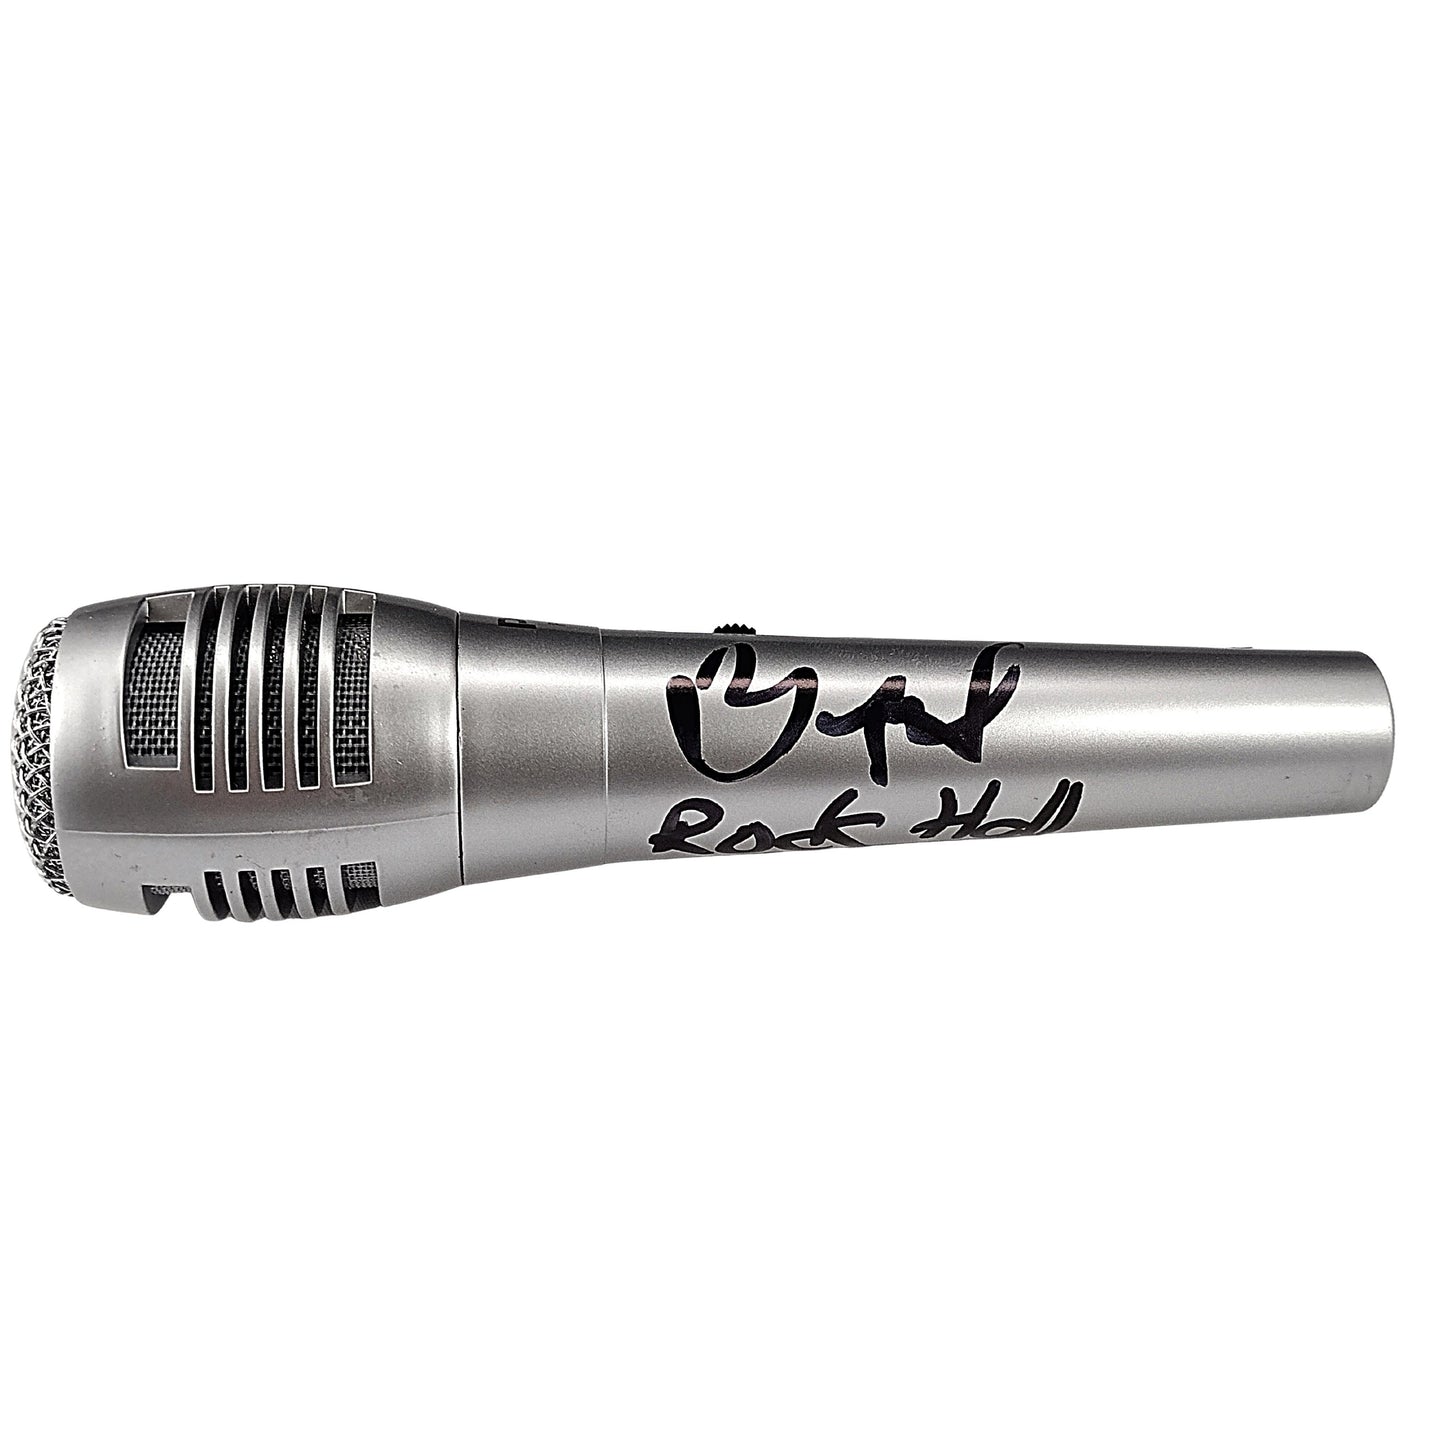 Music- Autographed- DJ Yella Signed Microphone with Rock Hall Inscription NWA Rap Rapper Beckett Authentication 303